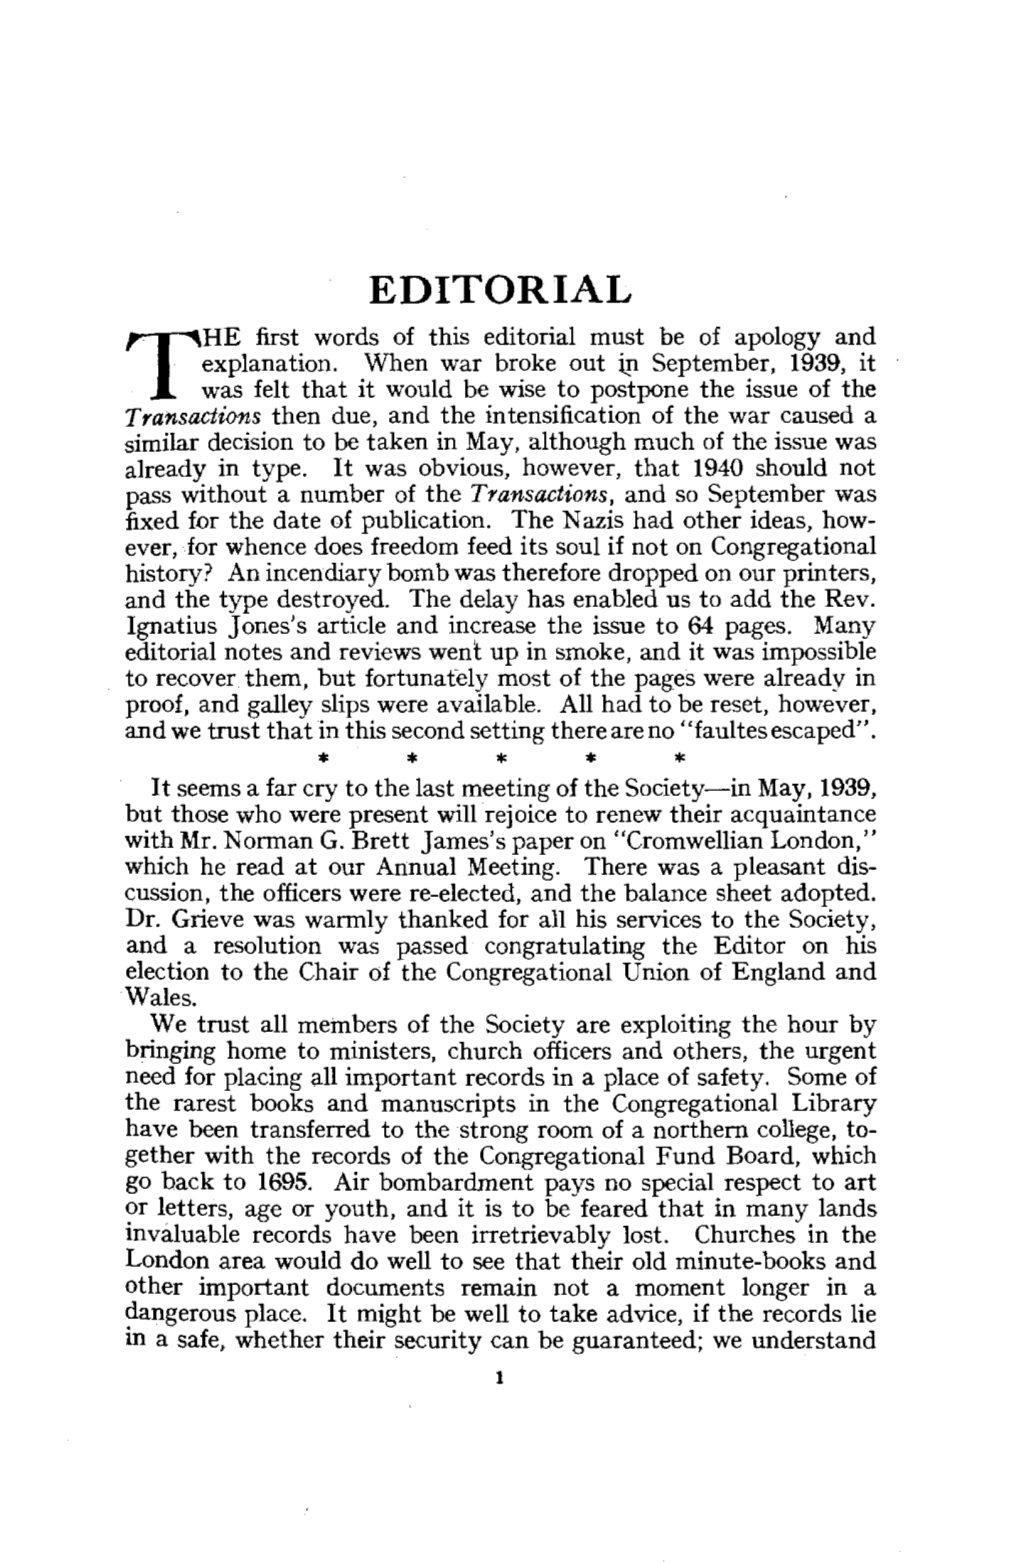 EDITORIAL HE First Words of This Editorial Must Be of Apology and Explanation